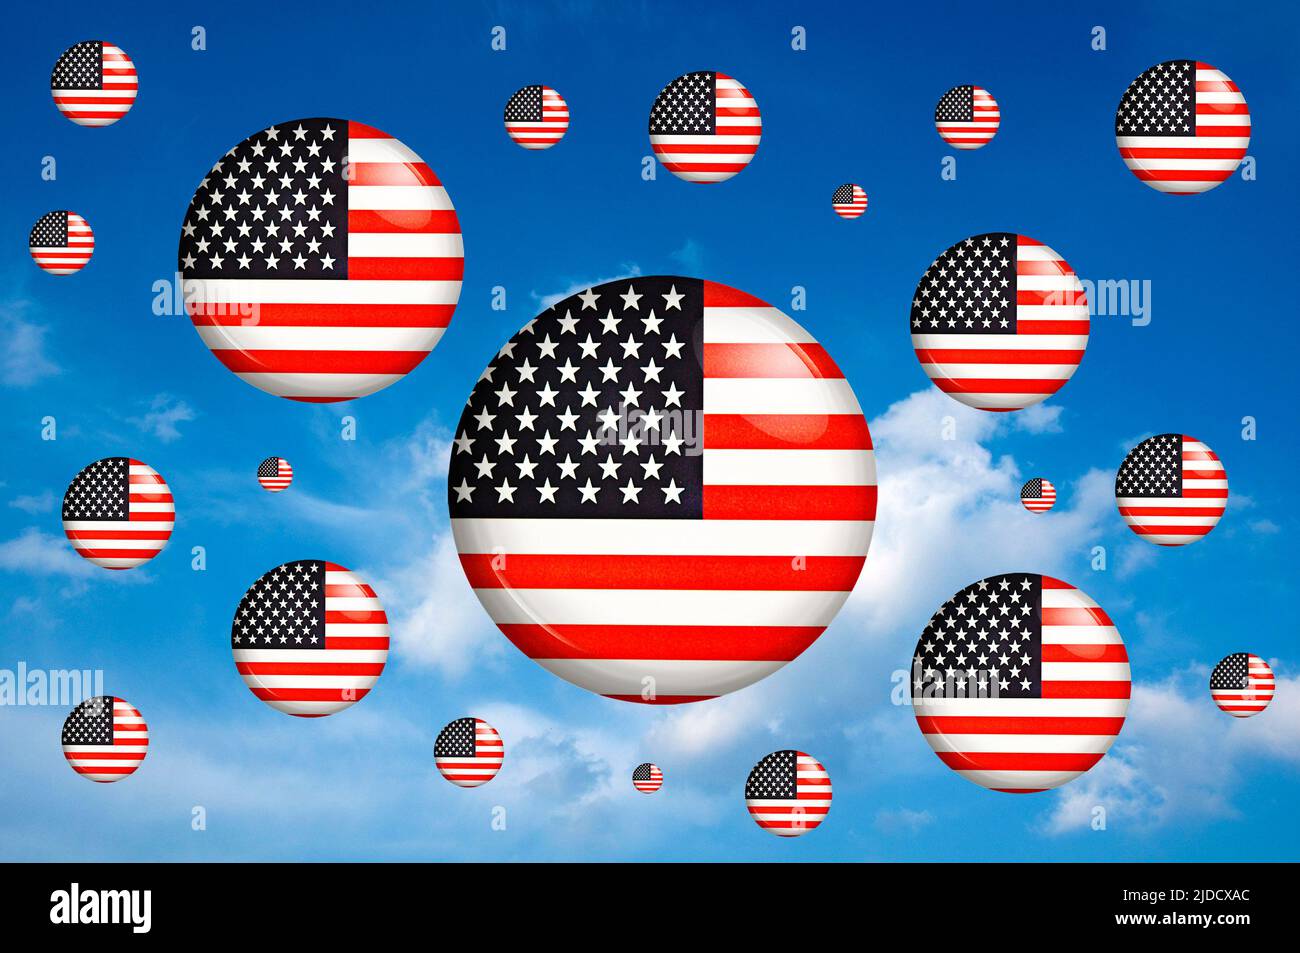 4th July indpenedence day concept illustration Stock Photo